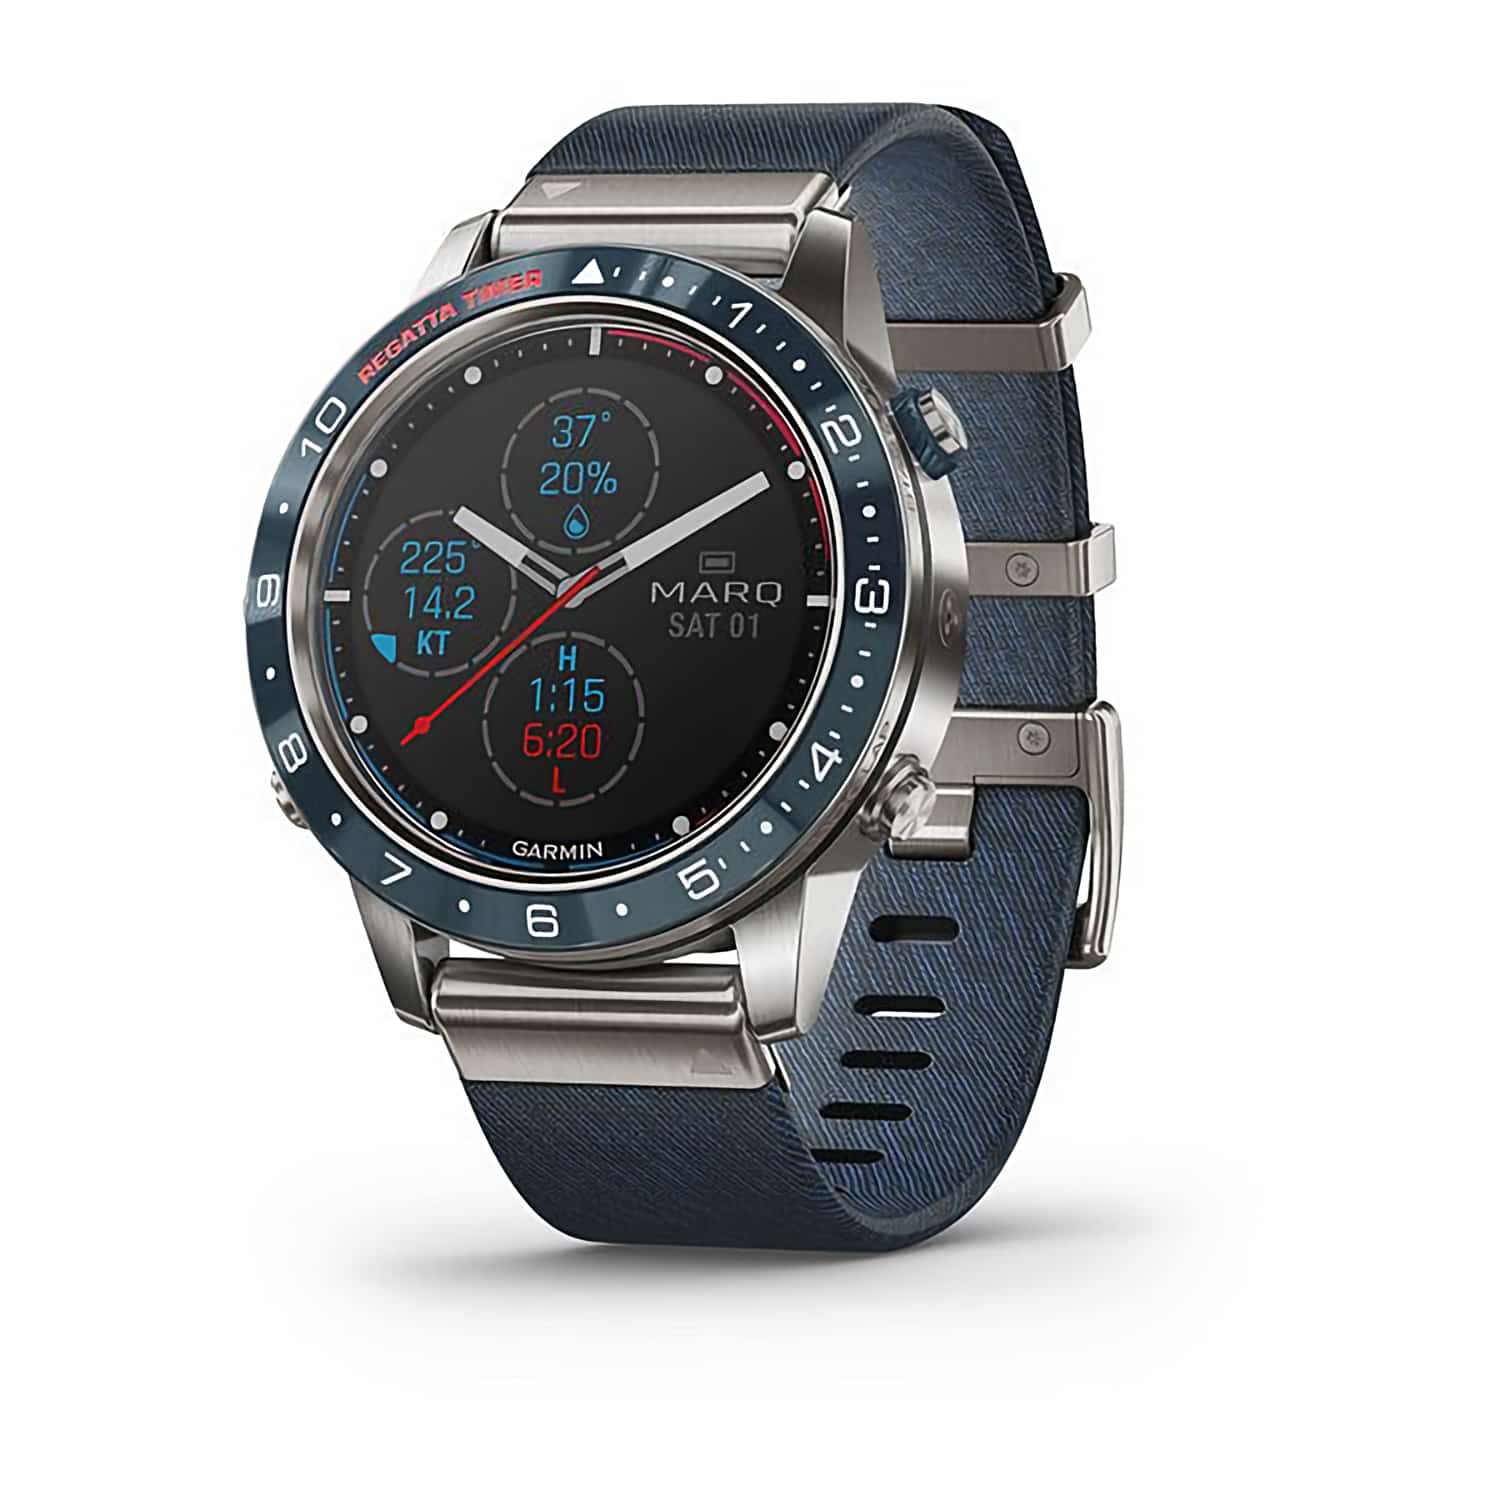 Garmin MARQ Captain Modern Tool Watch. Whether you own the cup or are inspired by those who do, MARQ™ Captain is the luxury modern tool watch that shows your passion for life at sea. For the master tactician who delivers exceptional performance in any con